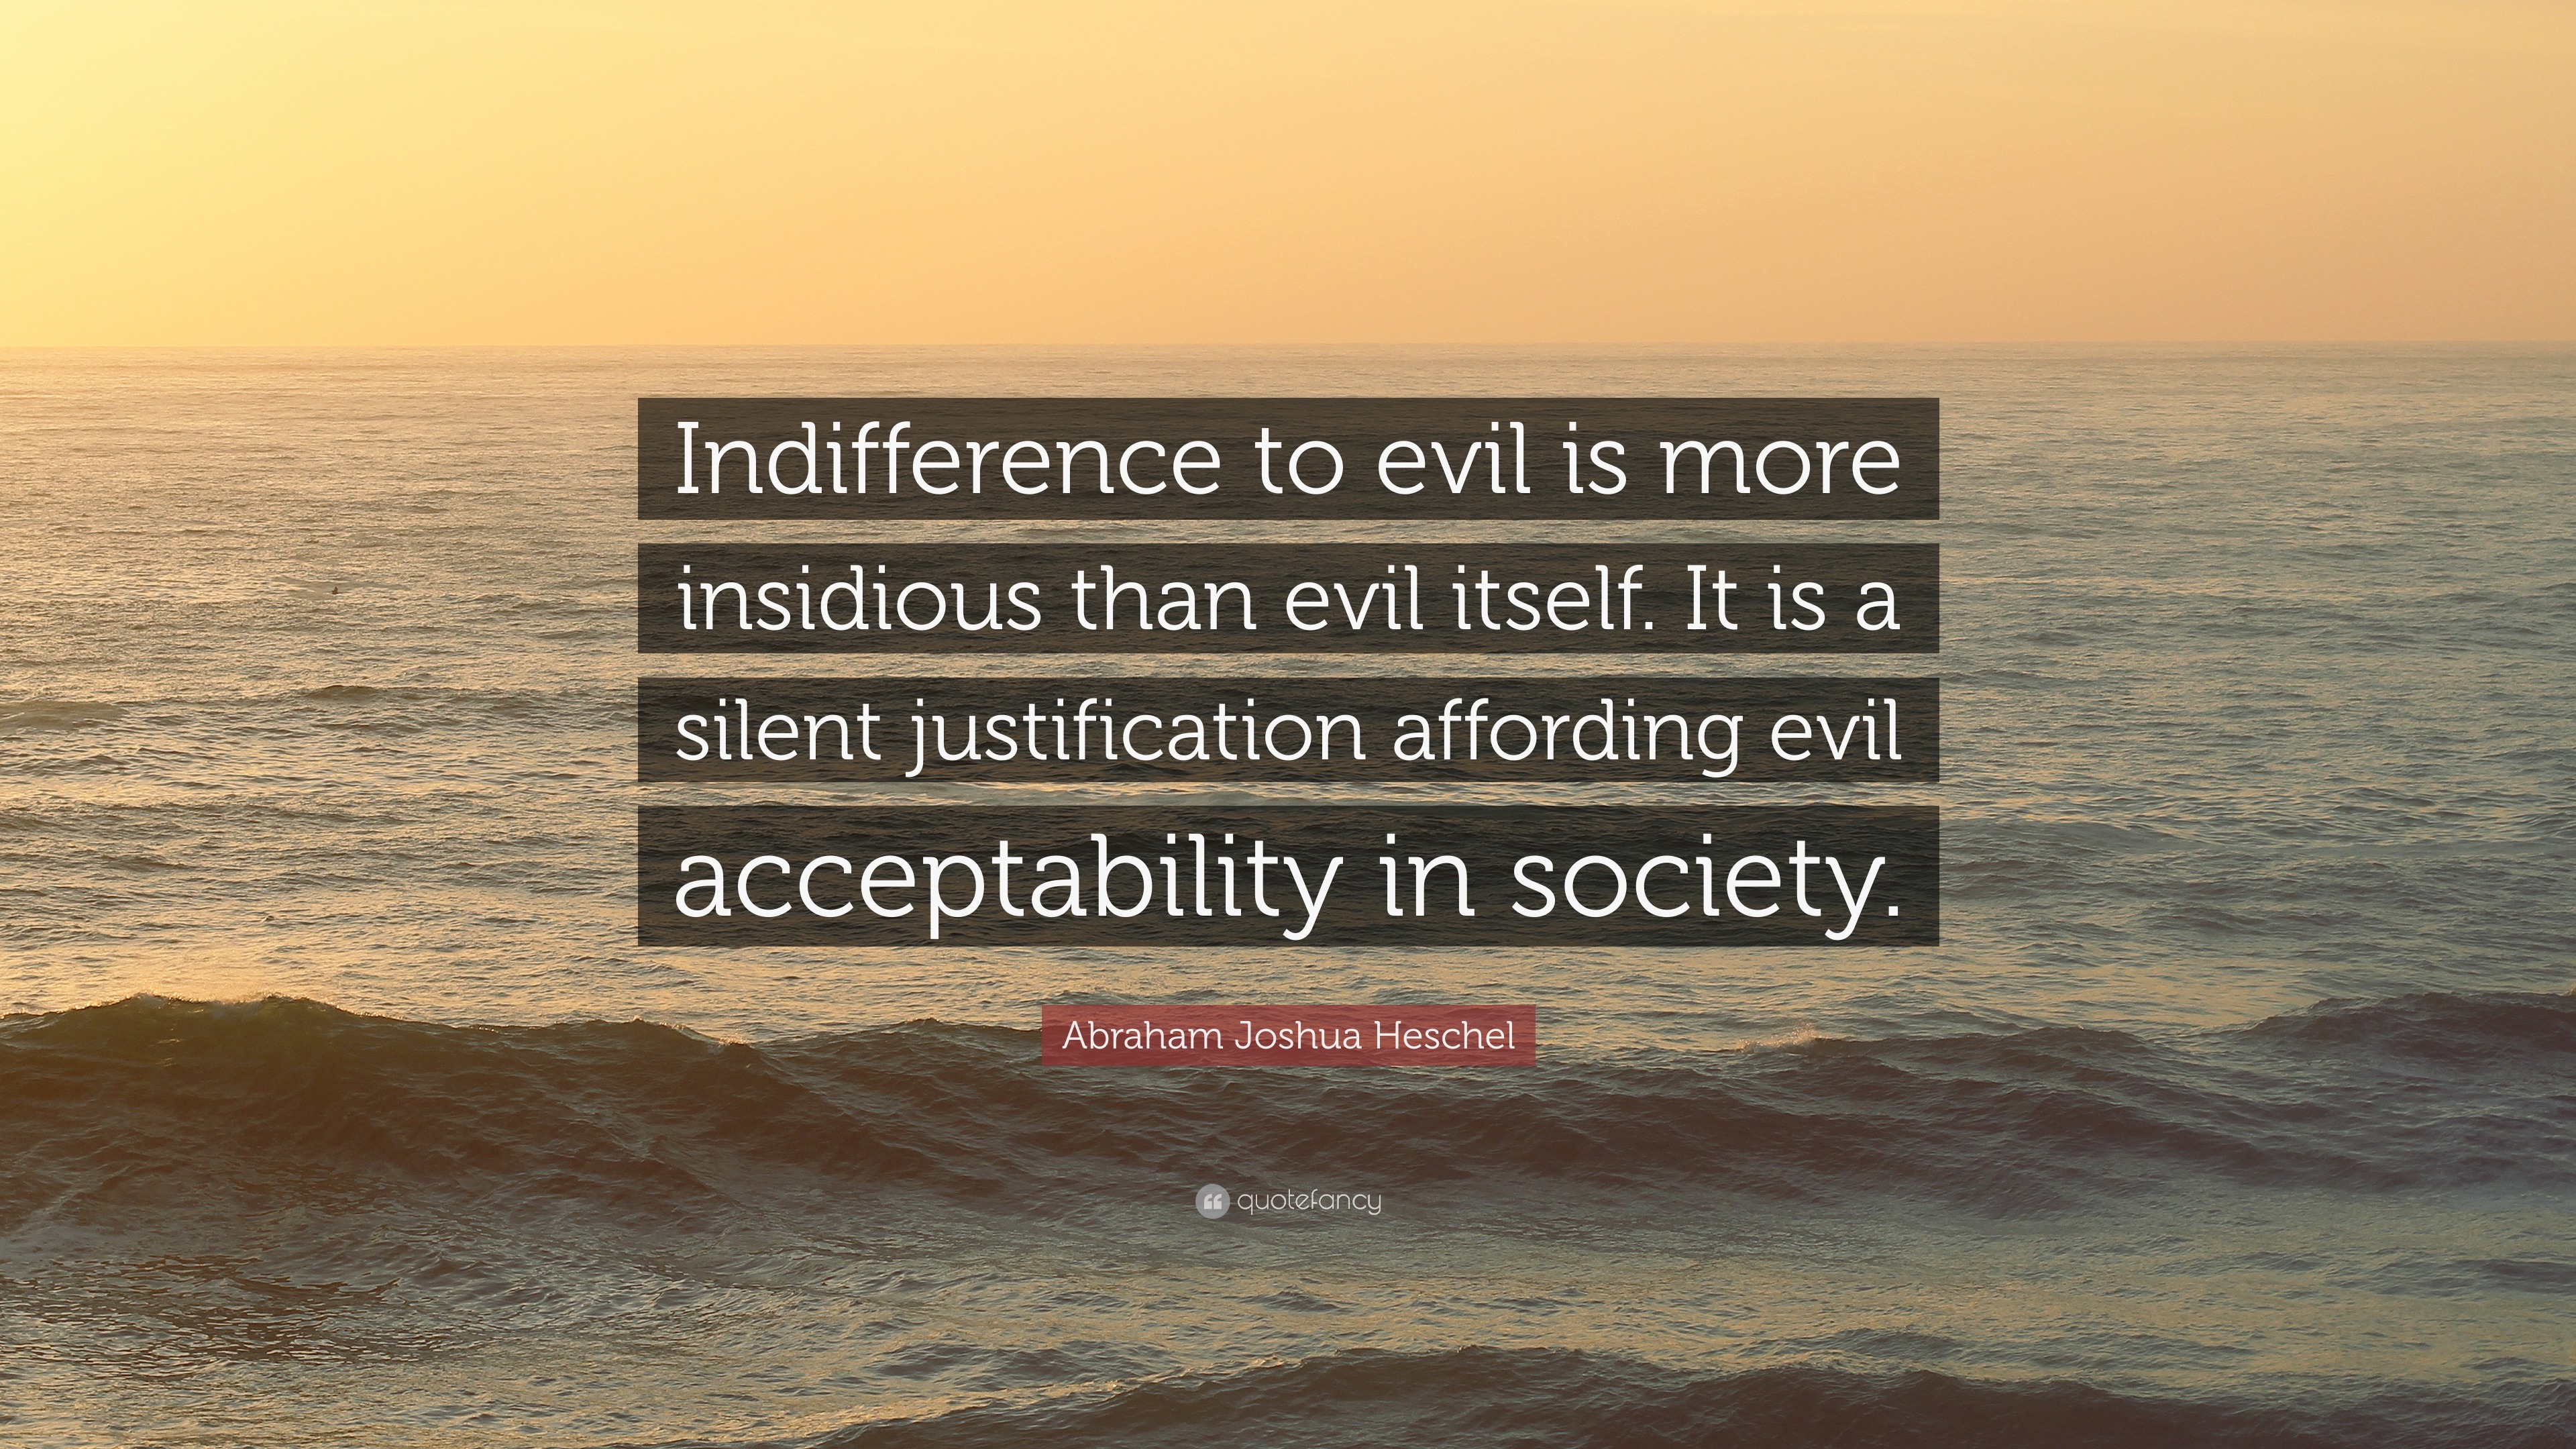 Abraham Joshua Heschel Quote: "Indifference to evil is more insidious than evil itself. It is a ...